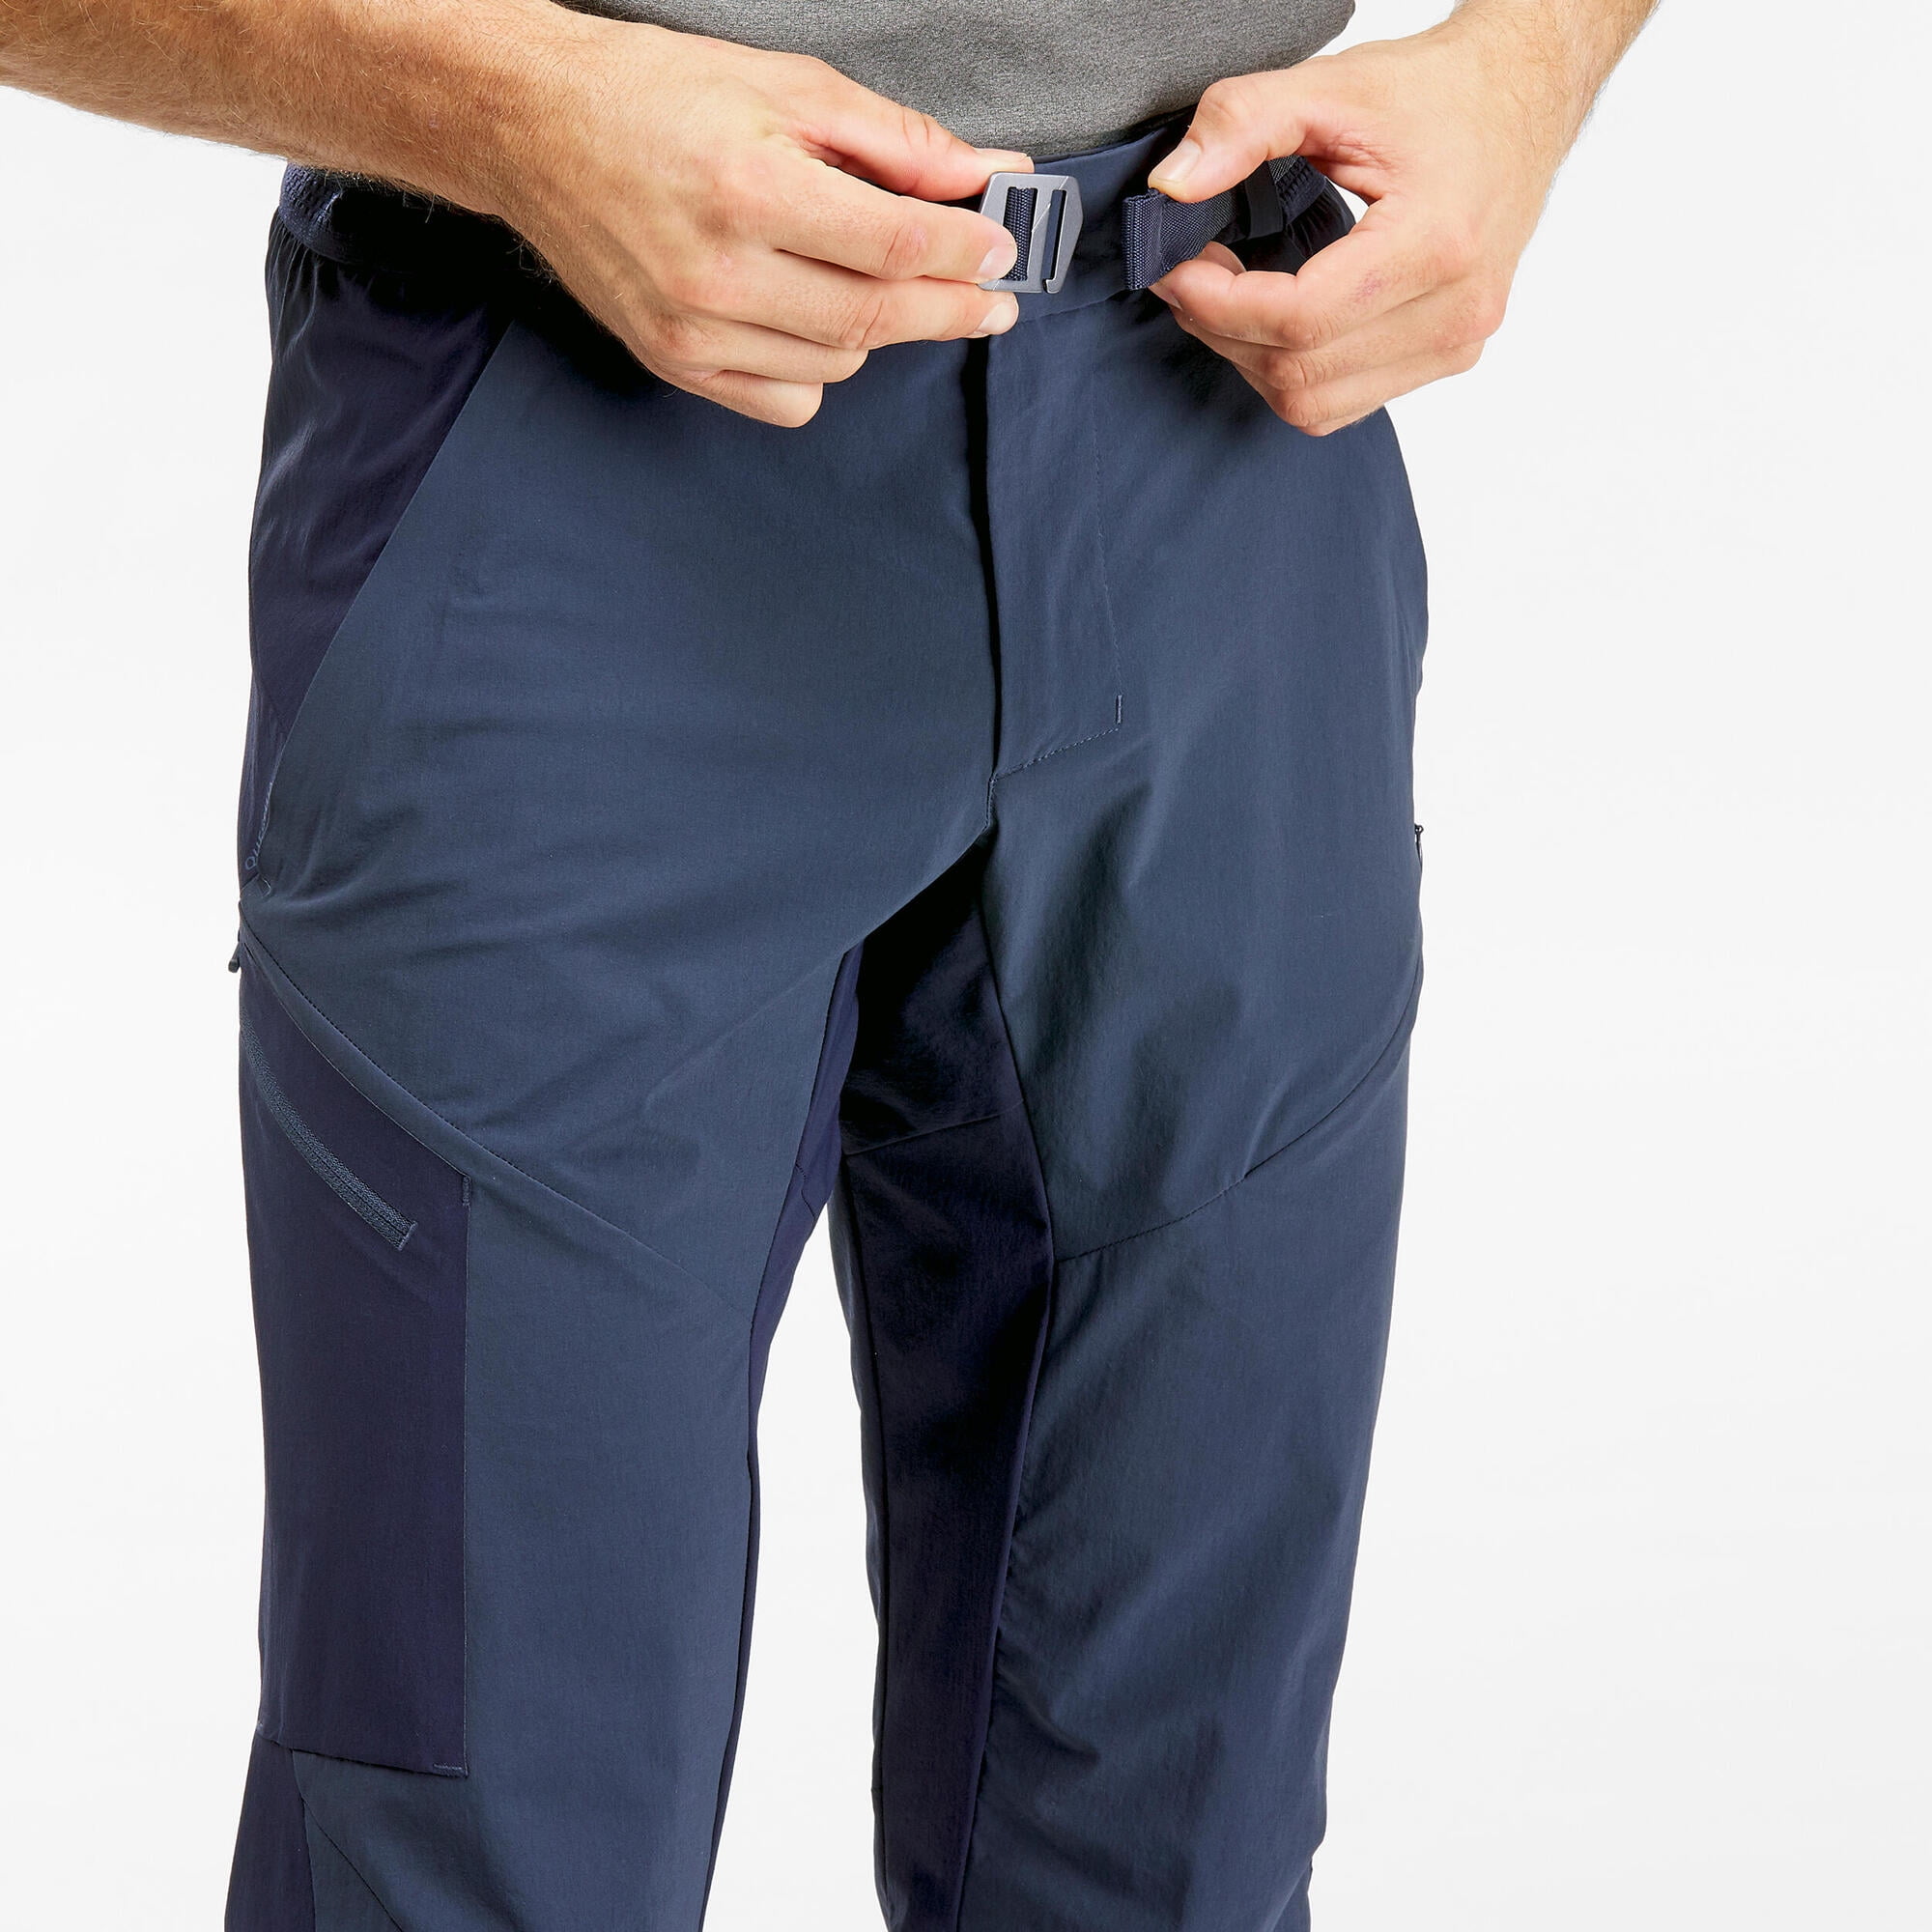 The Best Hiking Pants for Men by Nike. Nike.com